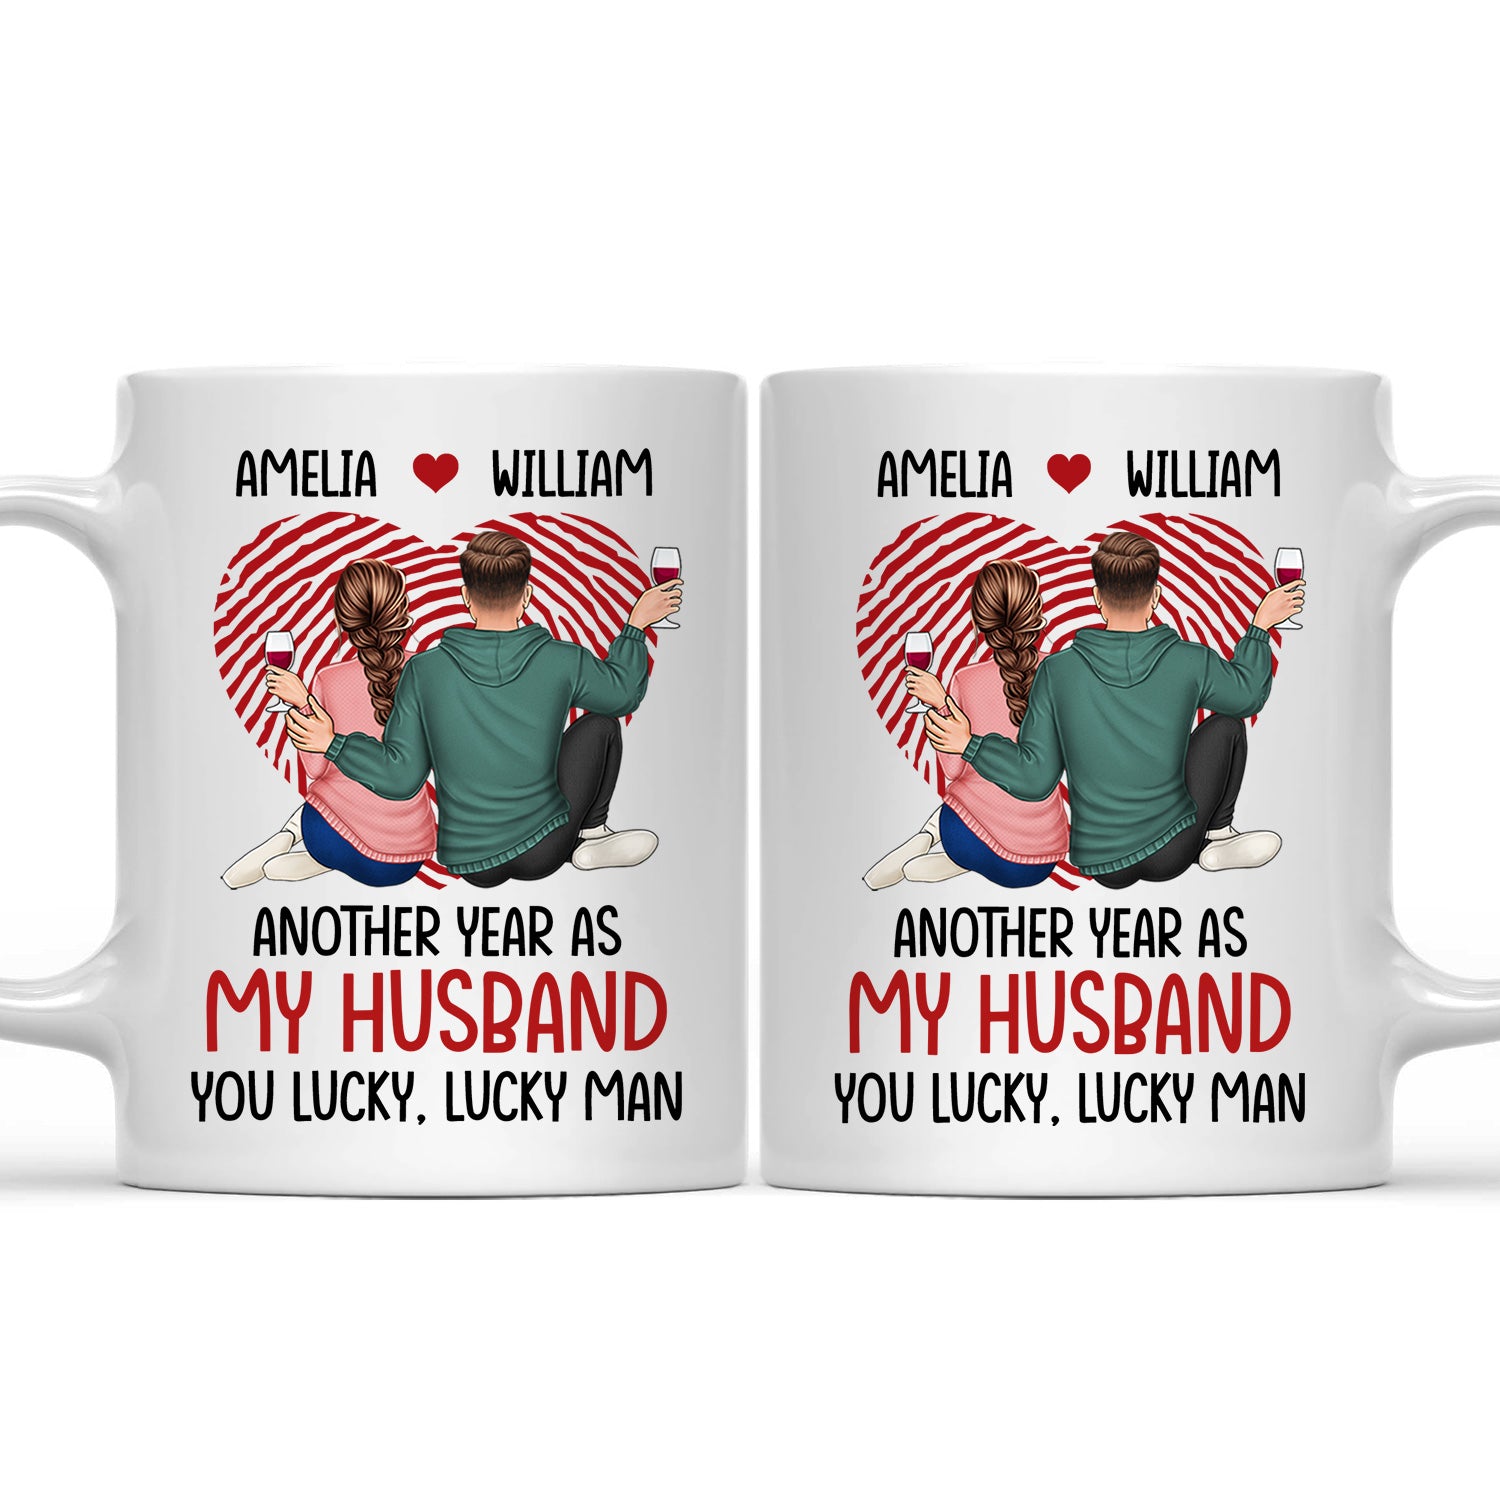 Another Year As My Husband - Anniversary, Loving Gift For Husband, Wife, Couples - Personalized Mug